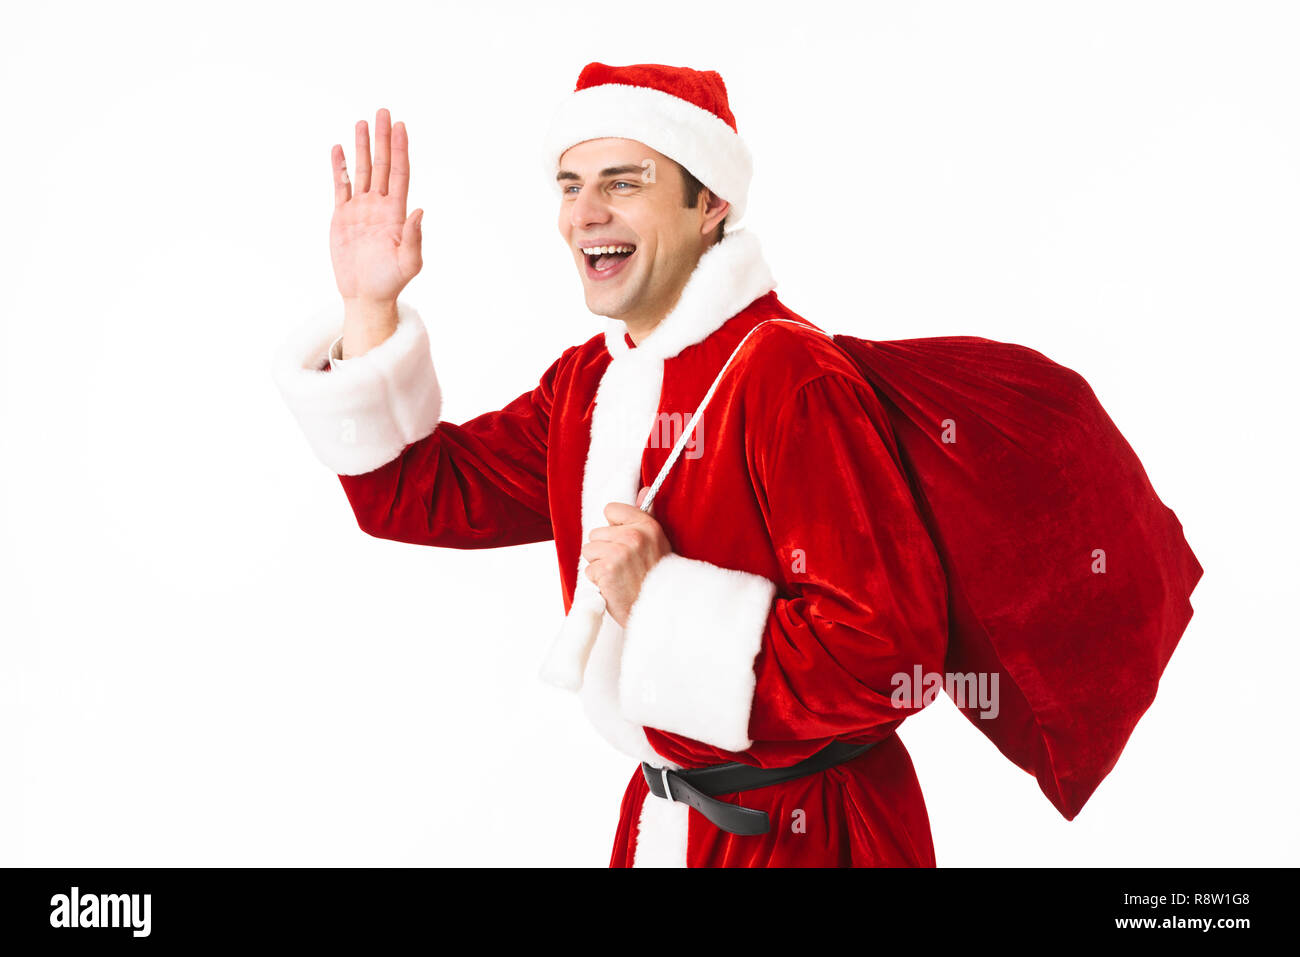 Portrait of caucasian man 30s in santa claus costume and red hat walking with gift bag over shoulder isolated on white background in studio Stock Photo